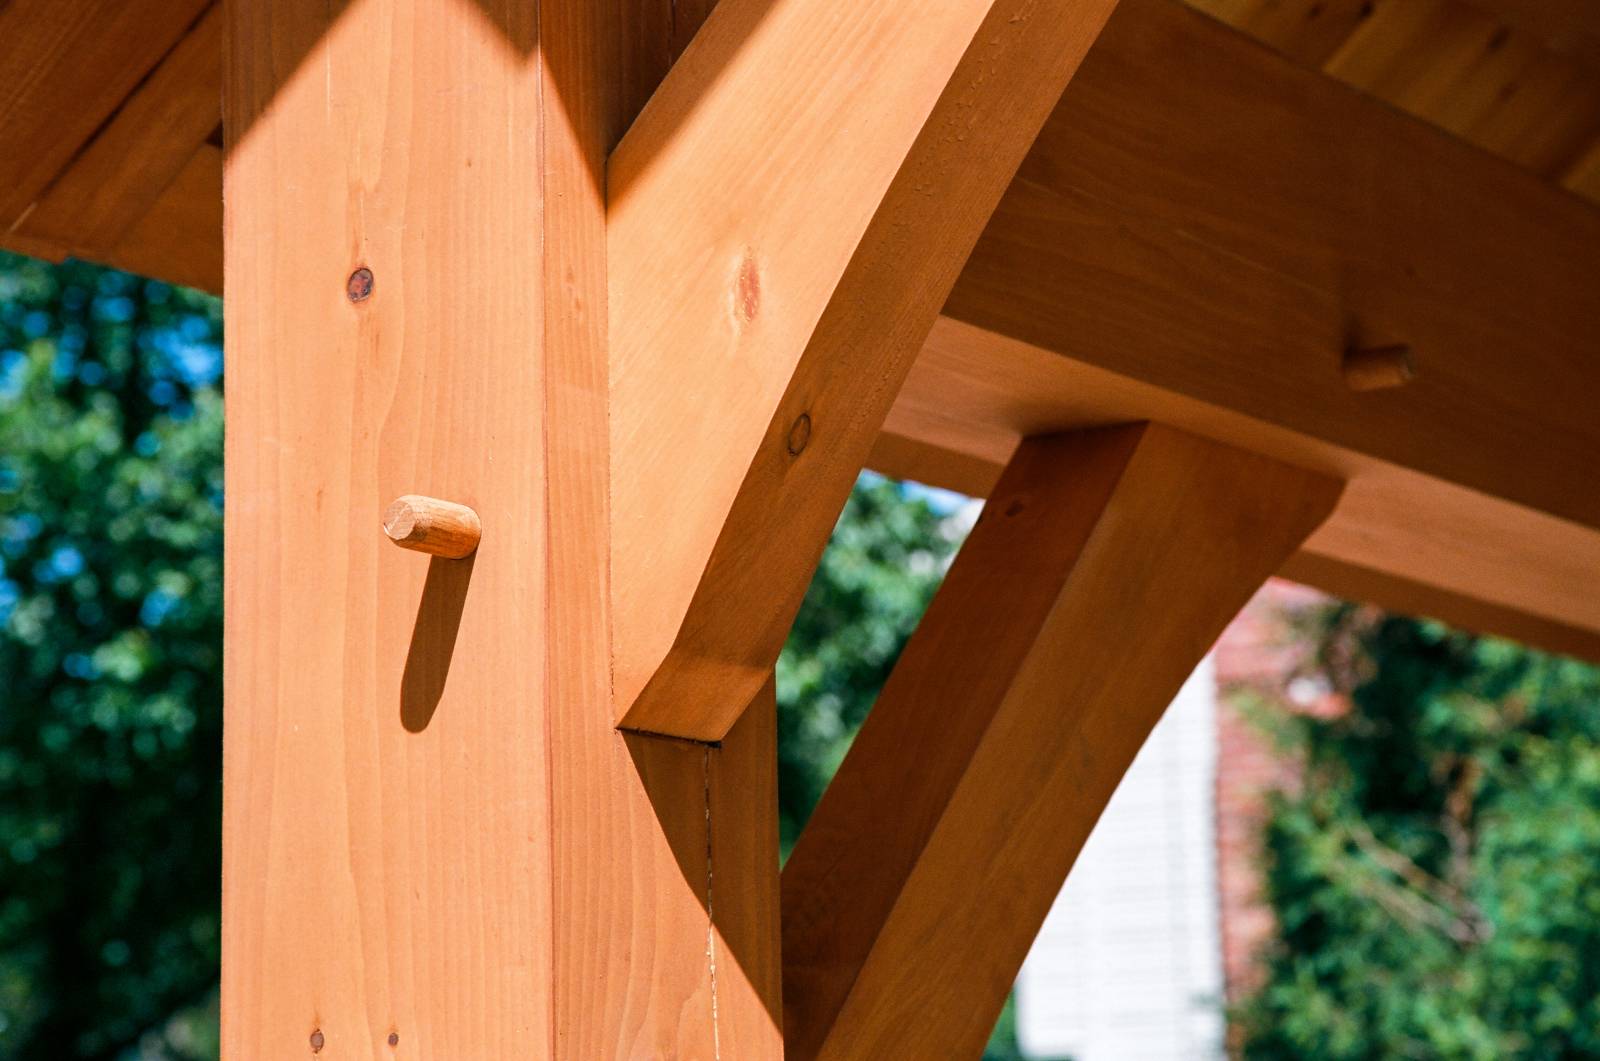 Timber frame joinery closeup: an oak peg secures an arched kneebrace in an 8x8 post. The kneebrace joinery is housed for greater strength.